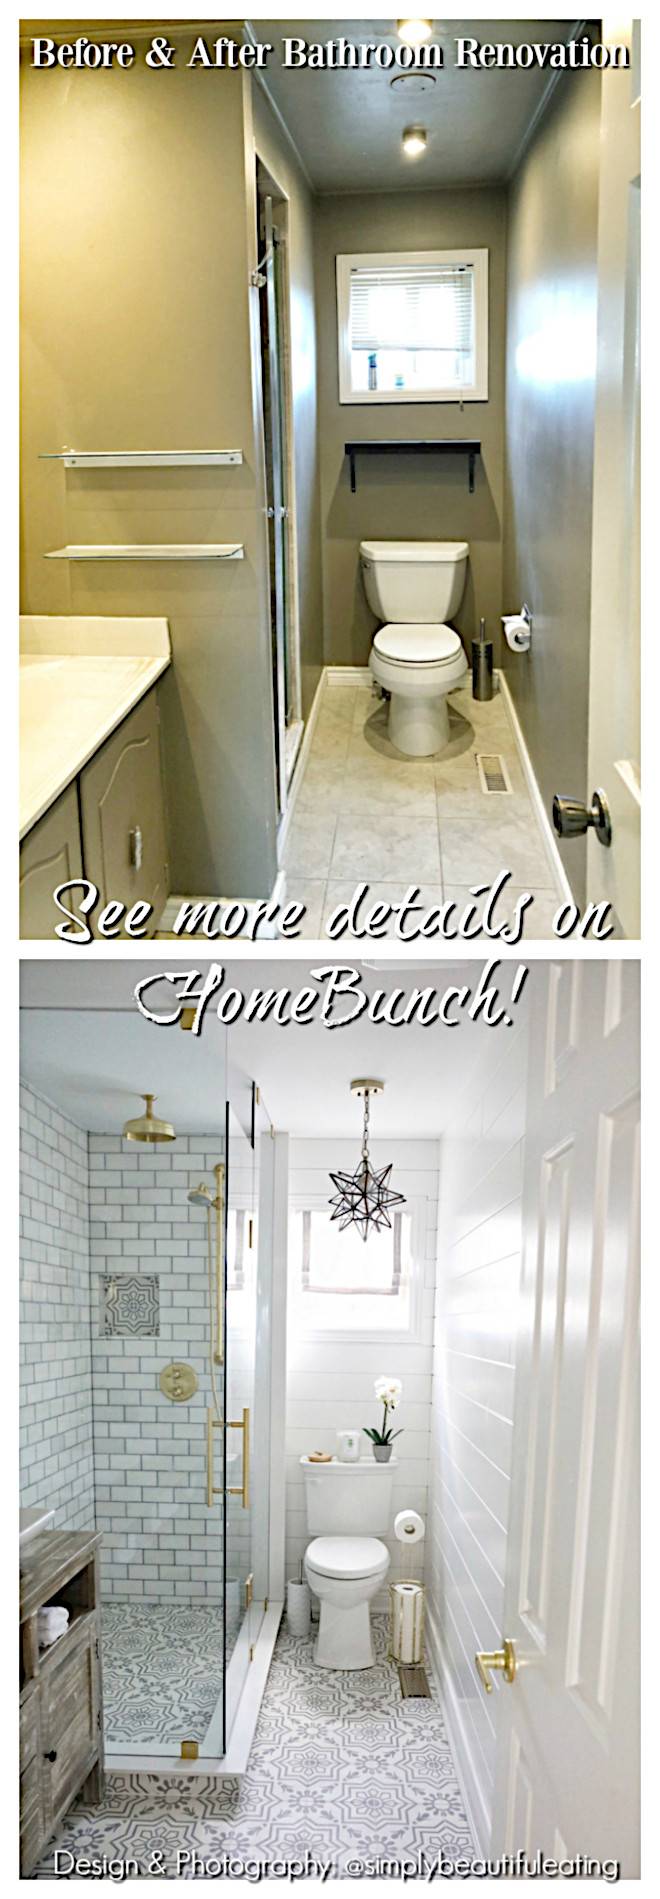 Bathroom before and after renovation pictures Bathroom before and after renovation photos Bathroom before and after renovation inspiration #Bathroom #beforeandafter #renovationpictures